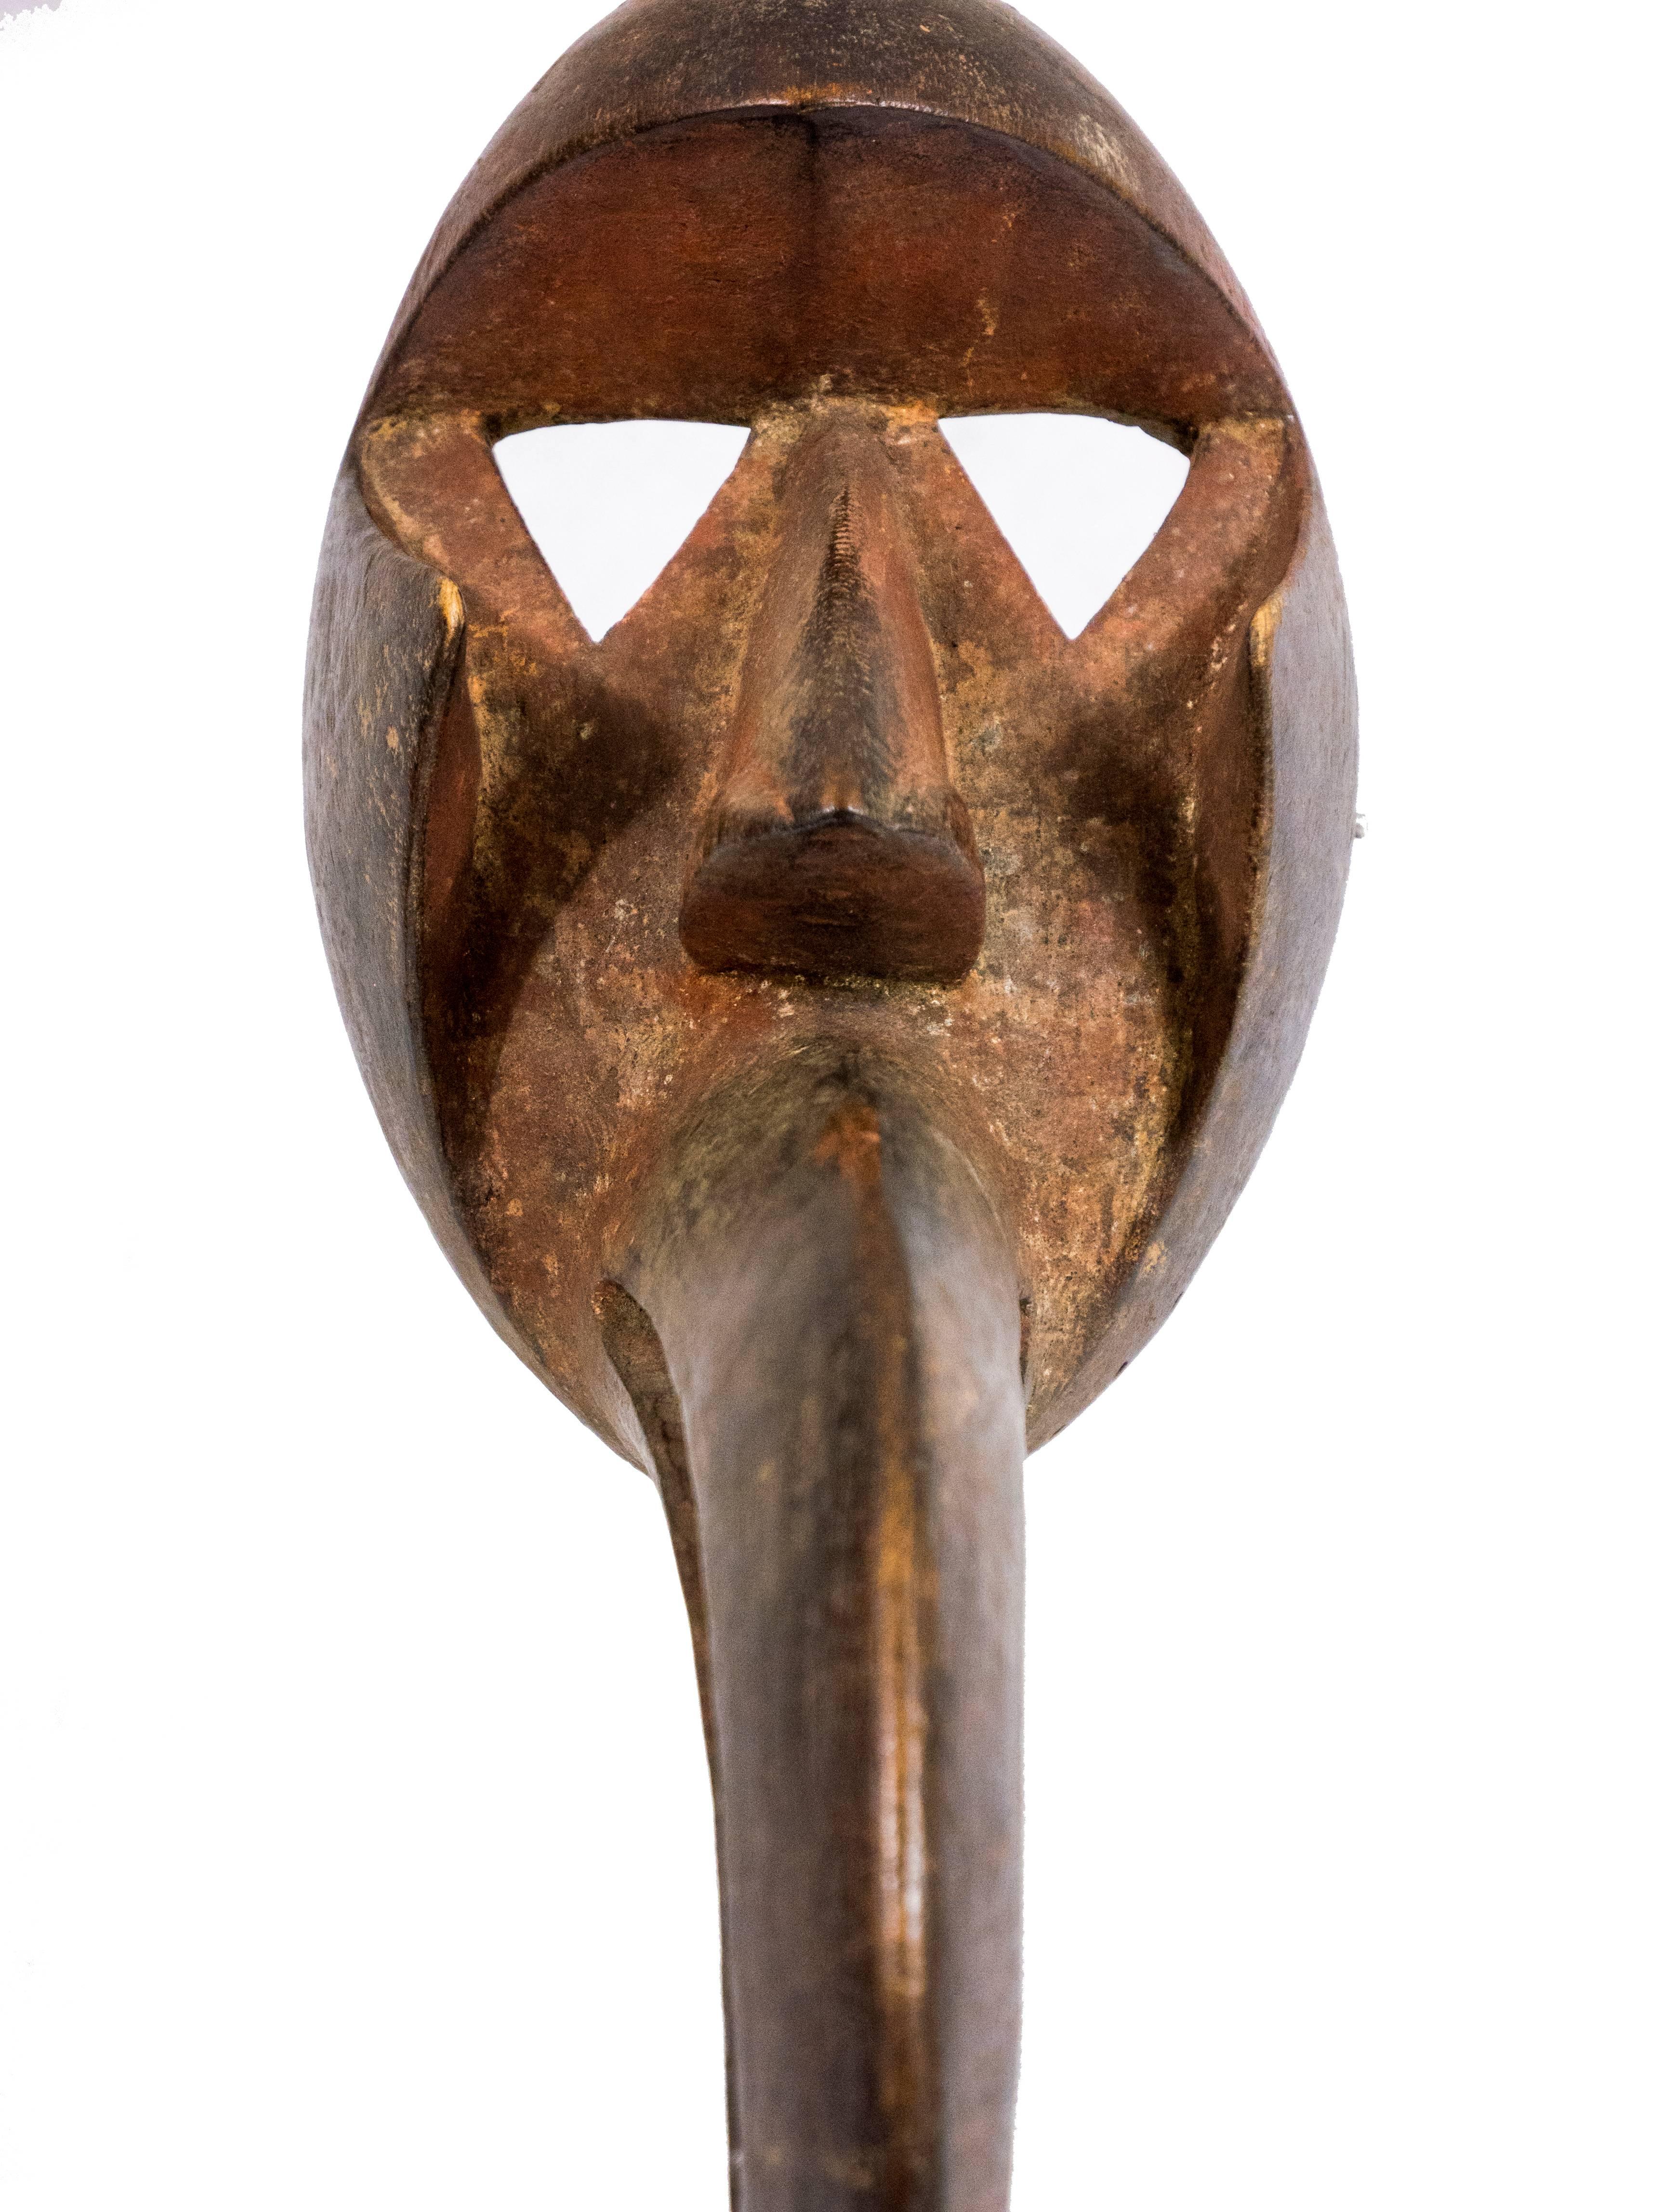 Dan Kagle mask
Dan people; Ivory Coast
Wood, pigment, kaolin;
Dimensions: H 20, W 7 1/2 inches.
Approximate age: 80 years (+/- 7) old confirmed by the Museum of Arts and Science, Milan. 

This mask is a gem for serious collectors.
Provenance: